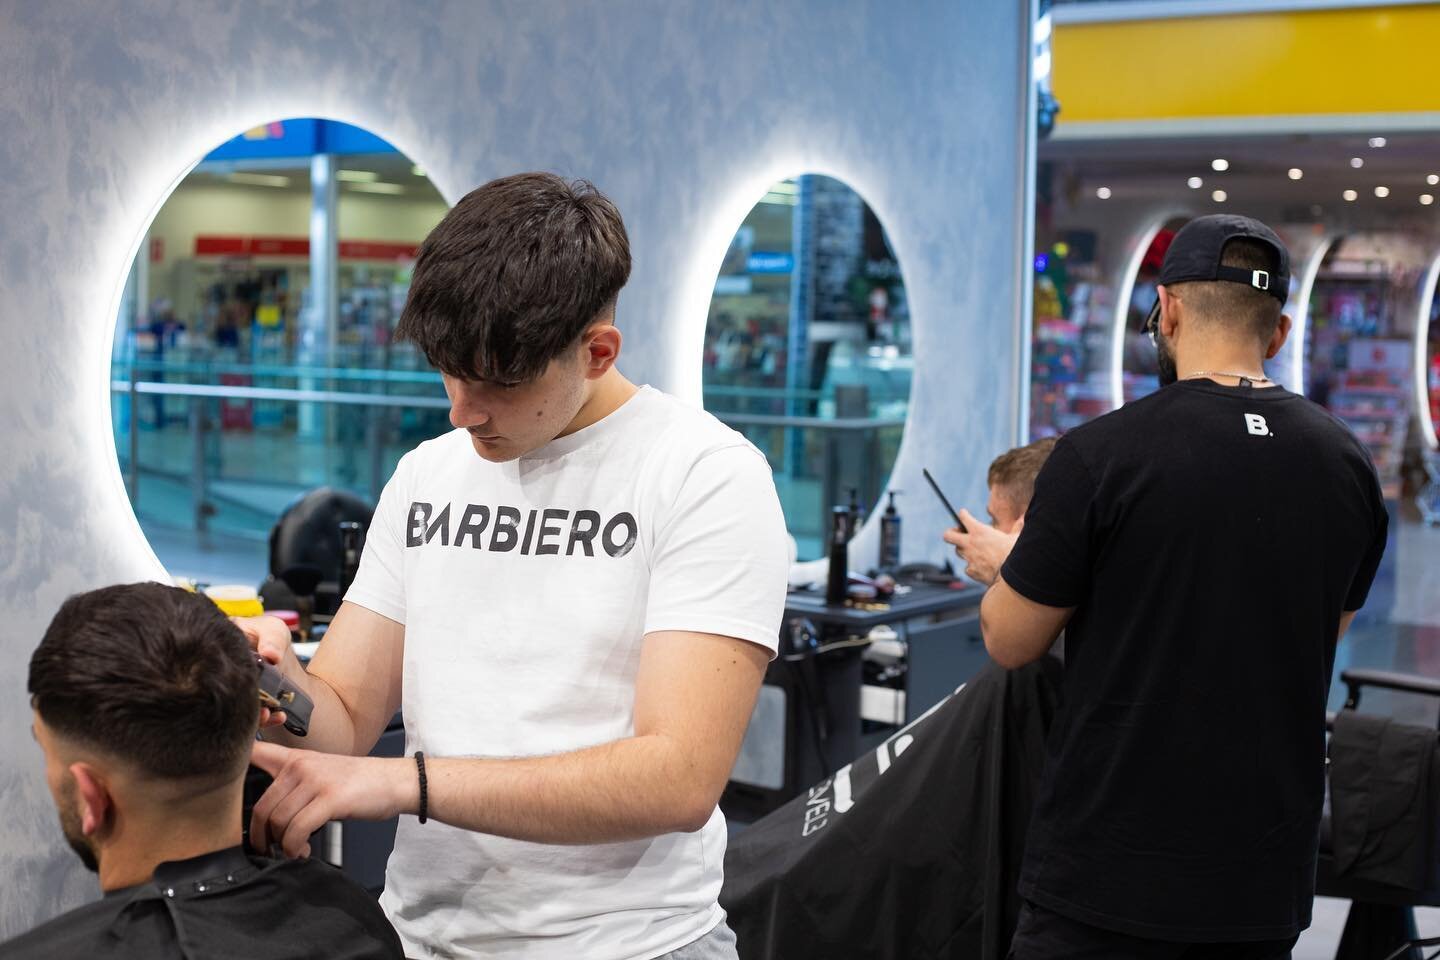 The BARBIERO Vision. 

The idea behind BARBIERO is what a modern-day barbershop should operate and look like through providing professional customer service, a family friendly environment, and most all, a great haircut. 

We can tell you all about it